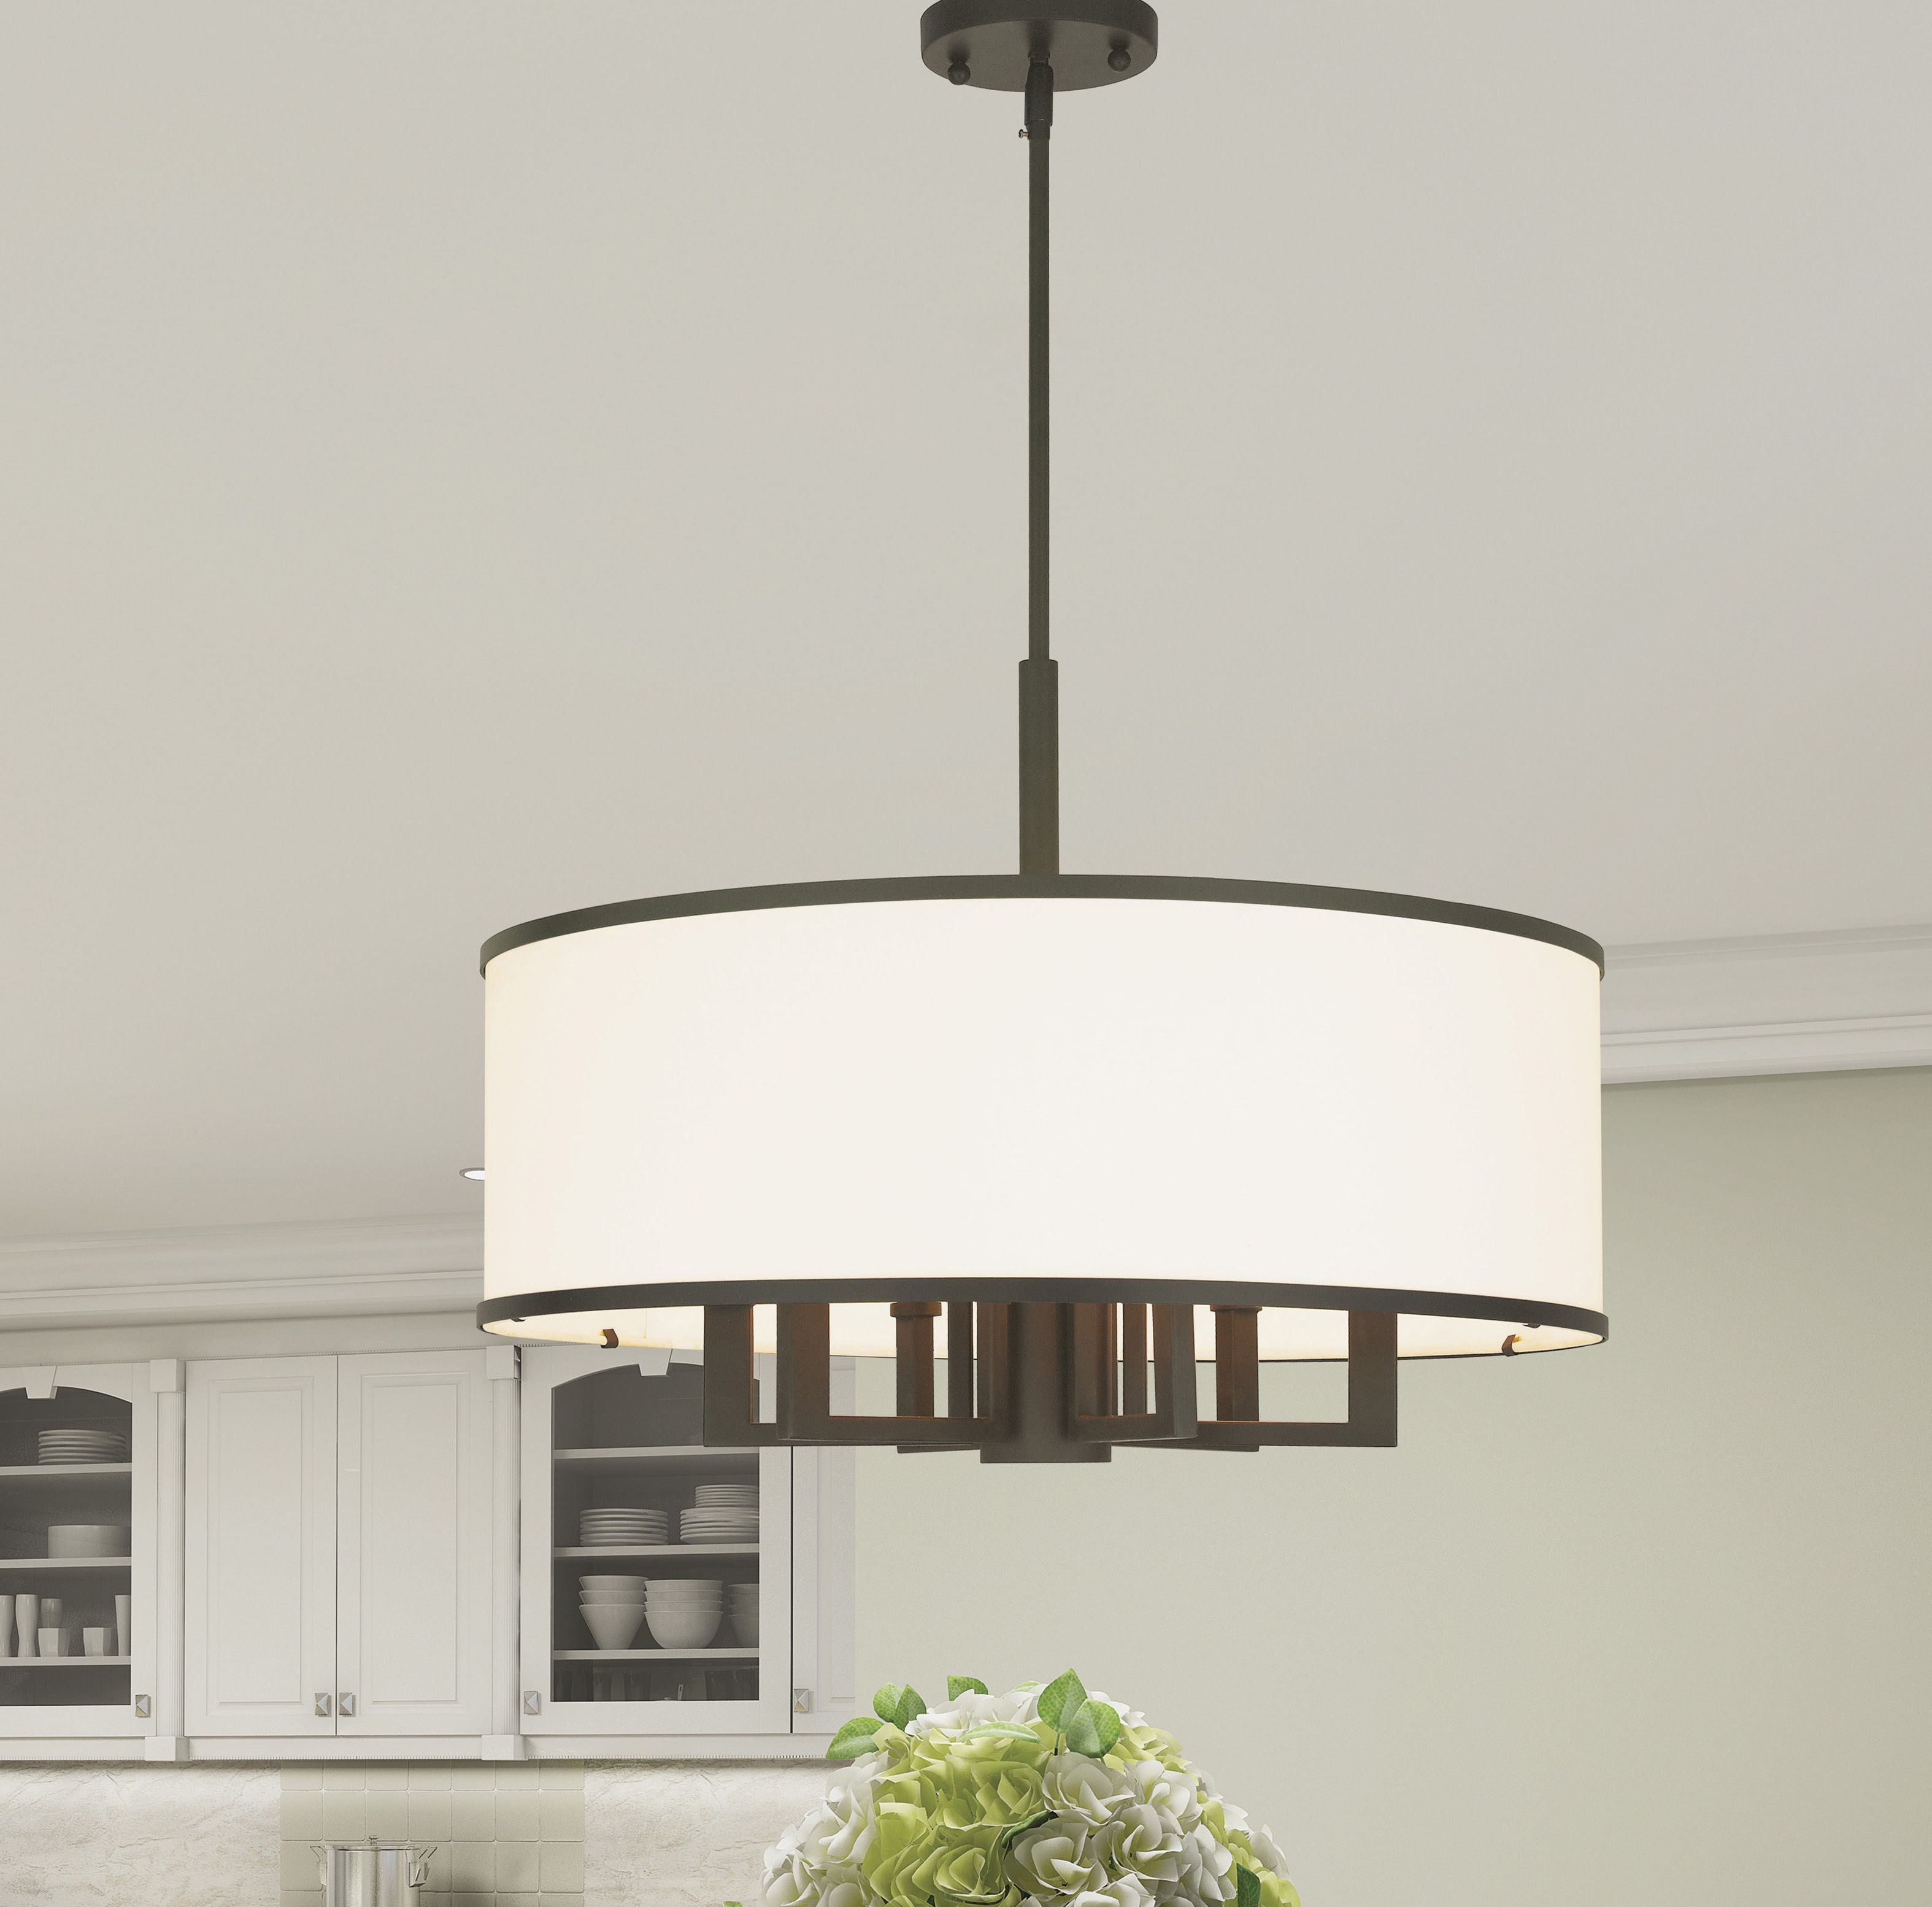 Widely Used Breithaup 7 Light Drum Chandelier Pertaining To Breithaup 4 Light Drum Chandeliers (View 17 of 25)